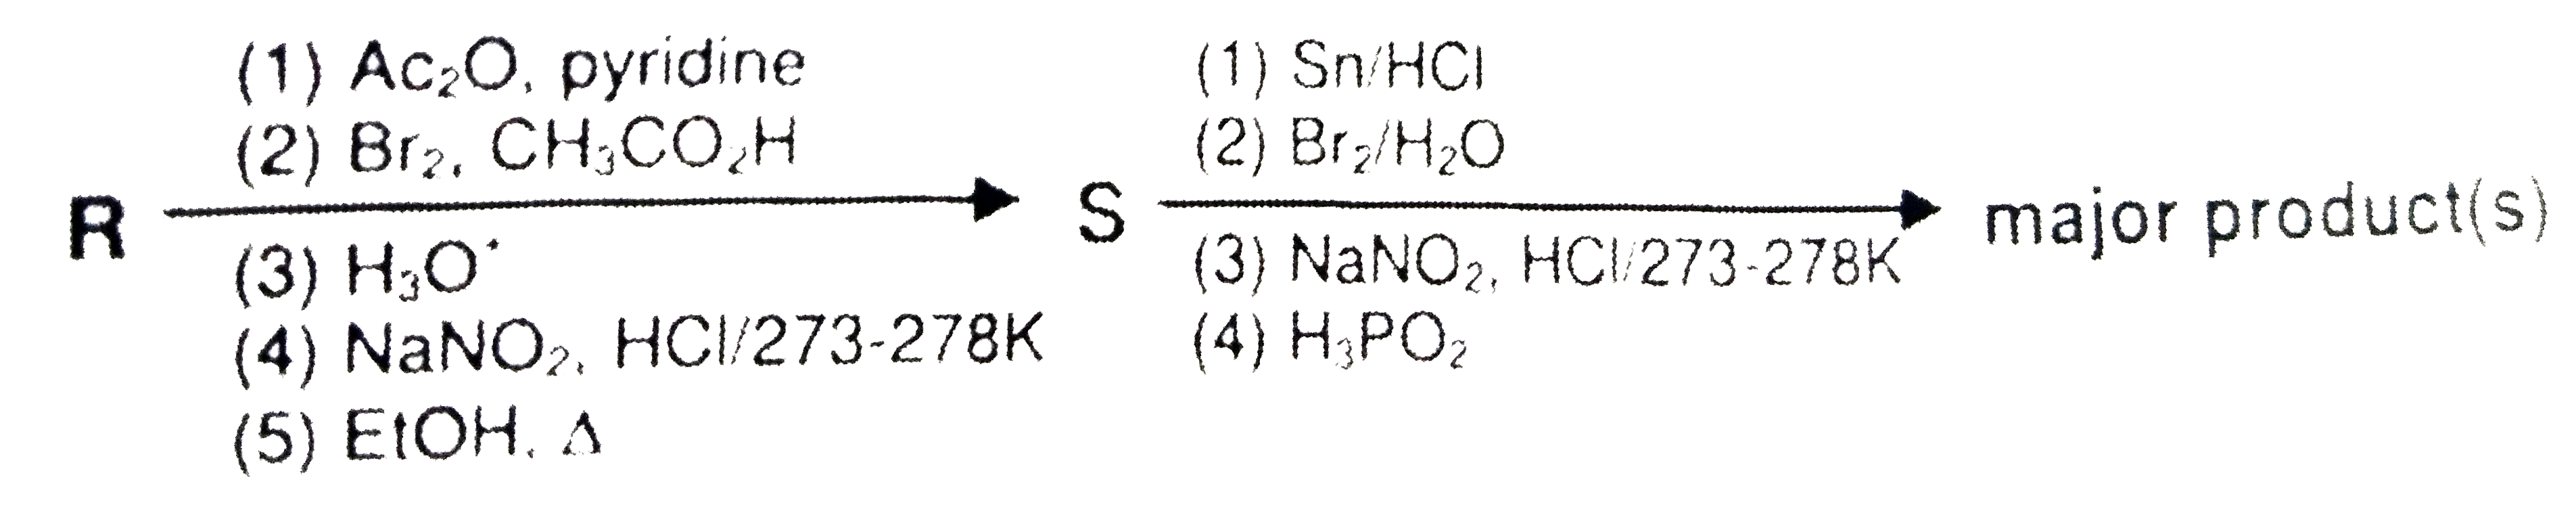 Aniline reacts with mixed acid (conc. HNO(3) and conc. H(2)SO(4)) at 288 K to give P (51%), Q (47%) and R(2%). The major product (s) of the following reaction sequence is (are)